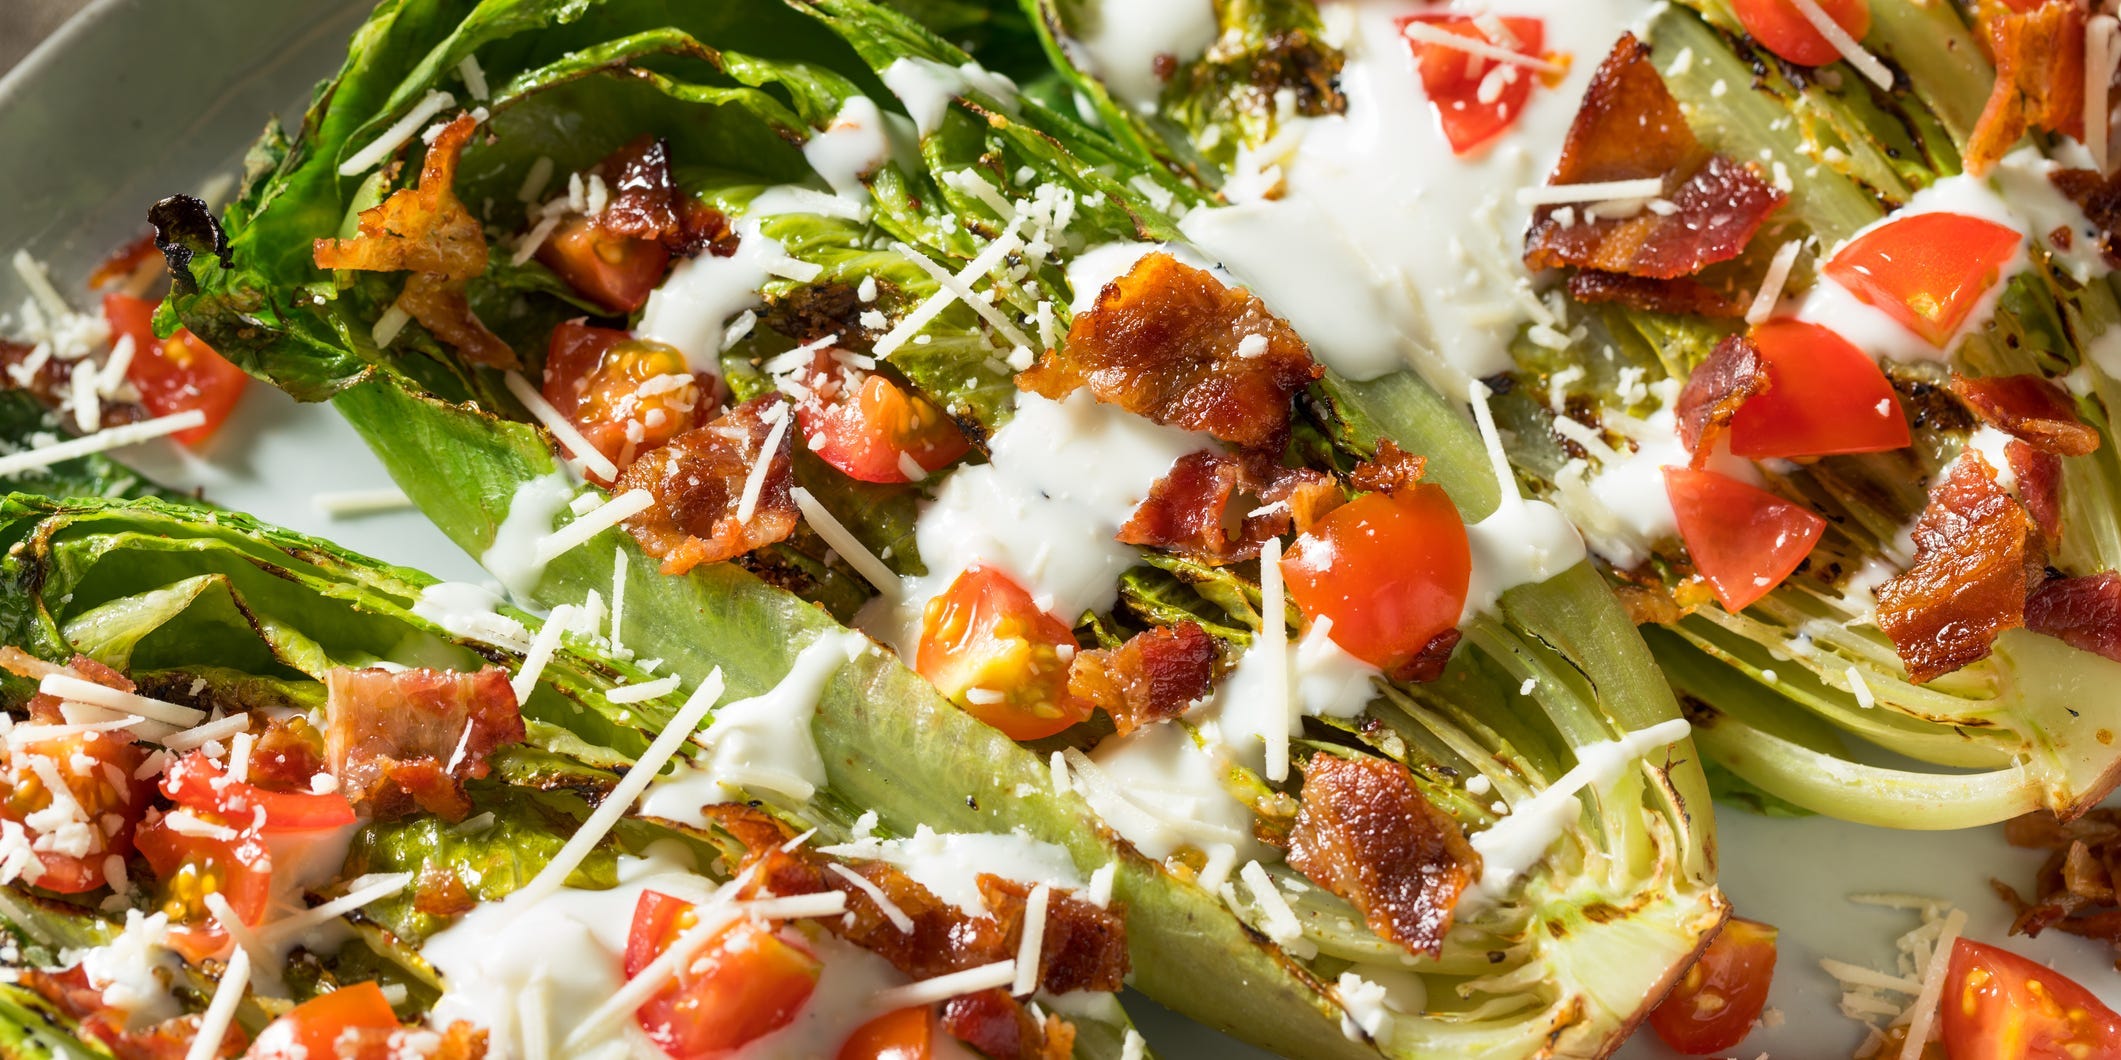 Grilled romaine lettuce topped with bacon, tomatoes, and blue cheese dressing